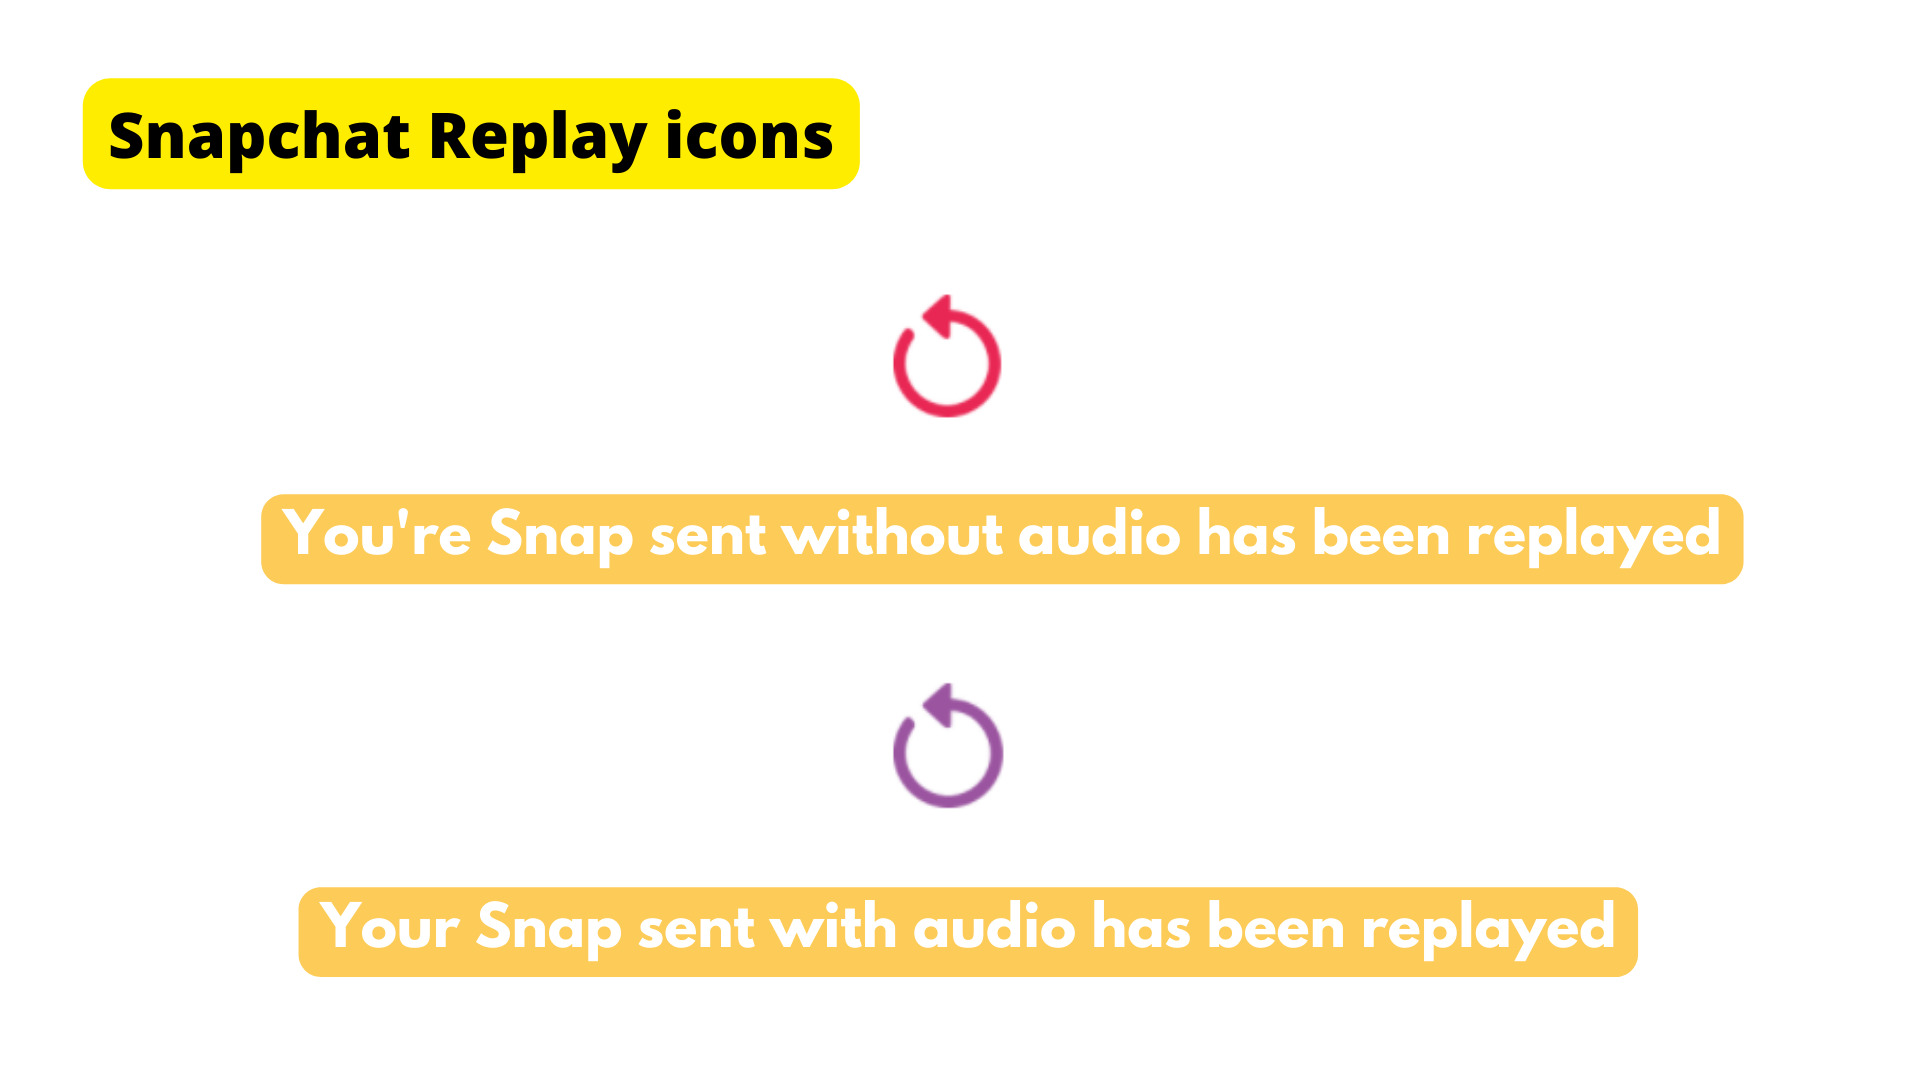 snapchat replay icons meaning